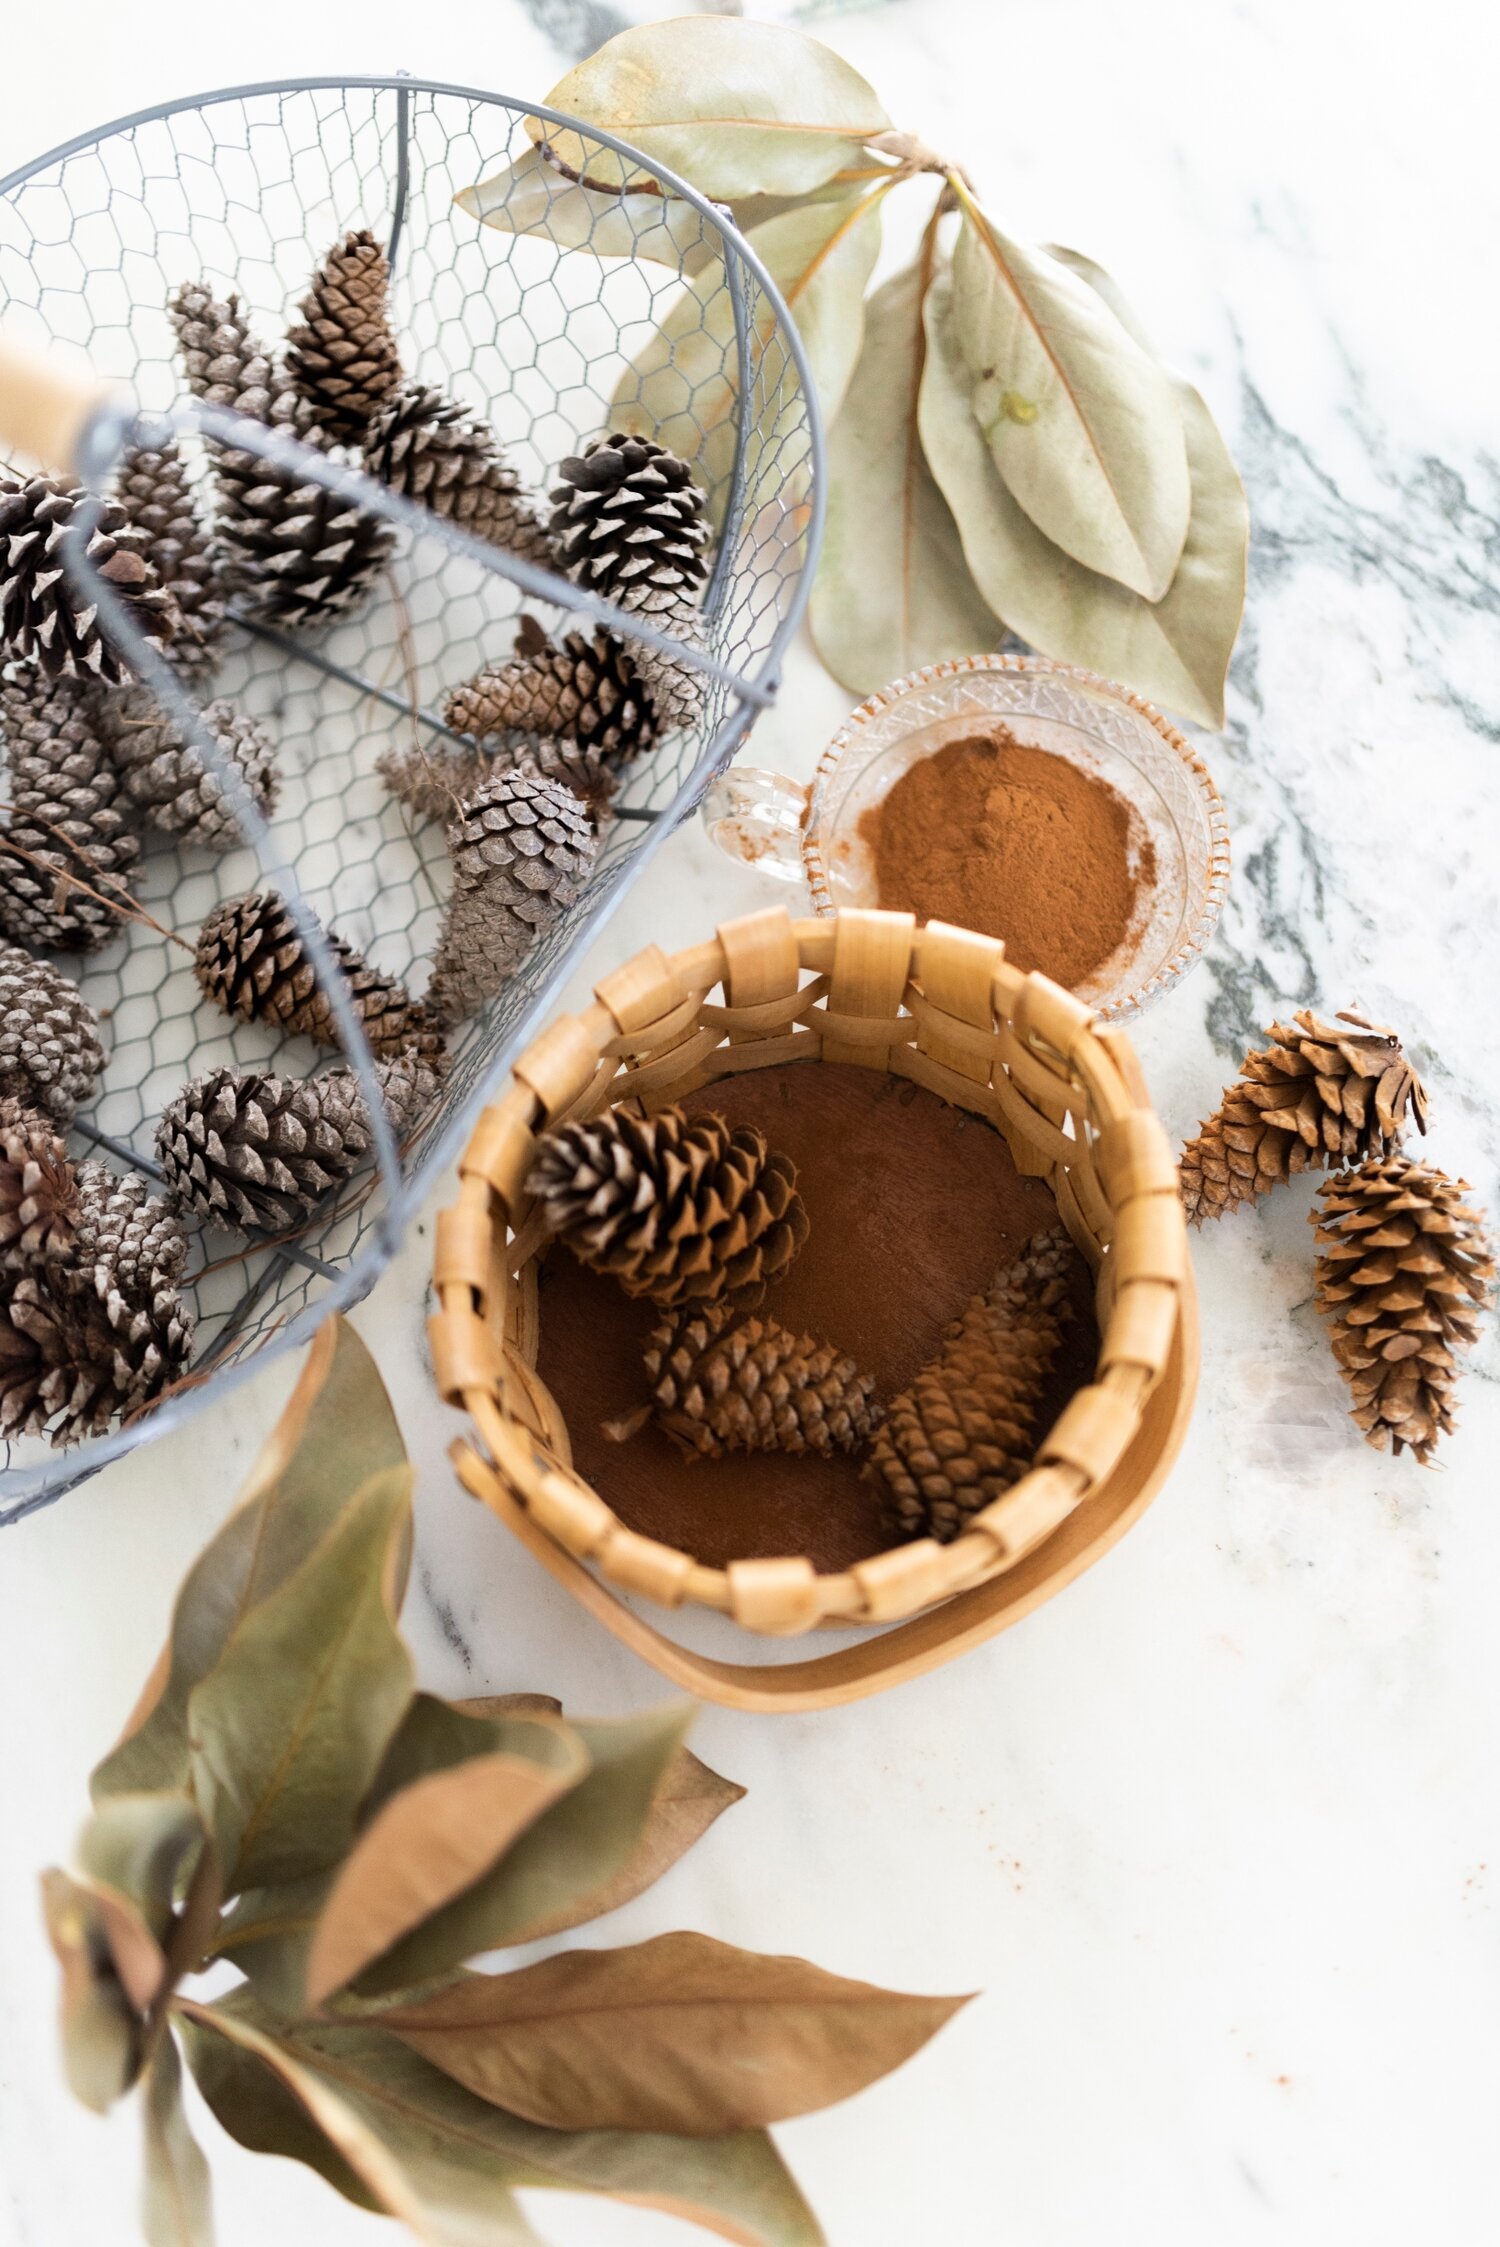 decorating+pinecones+for+fall.jpg